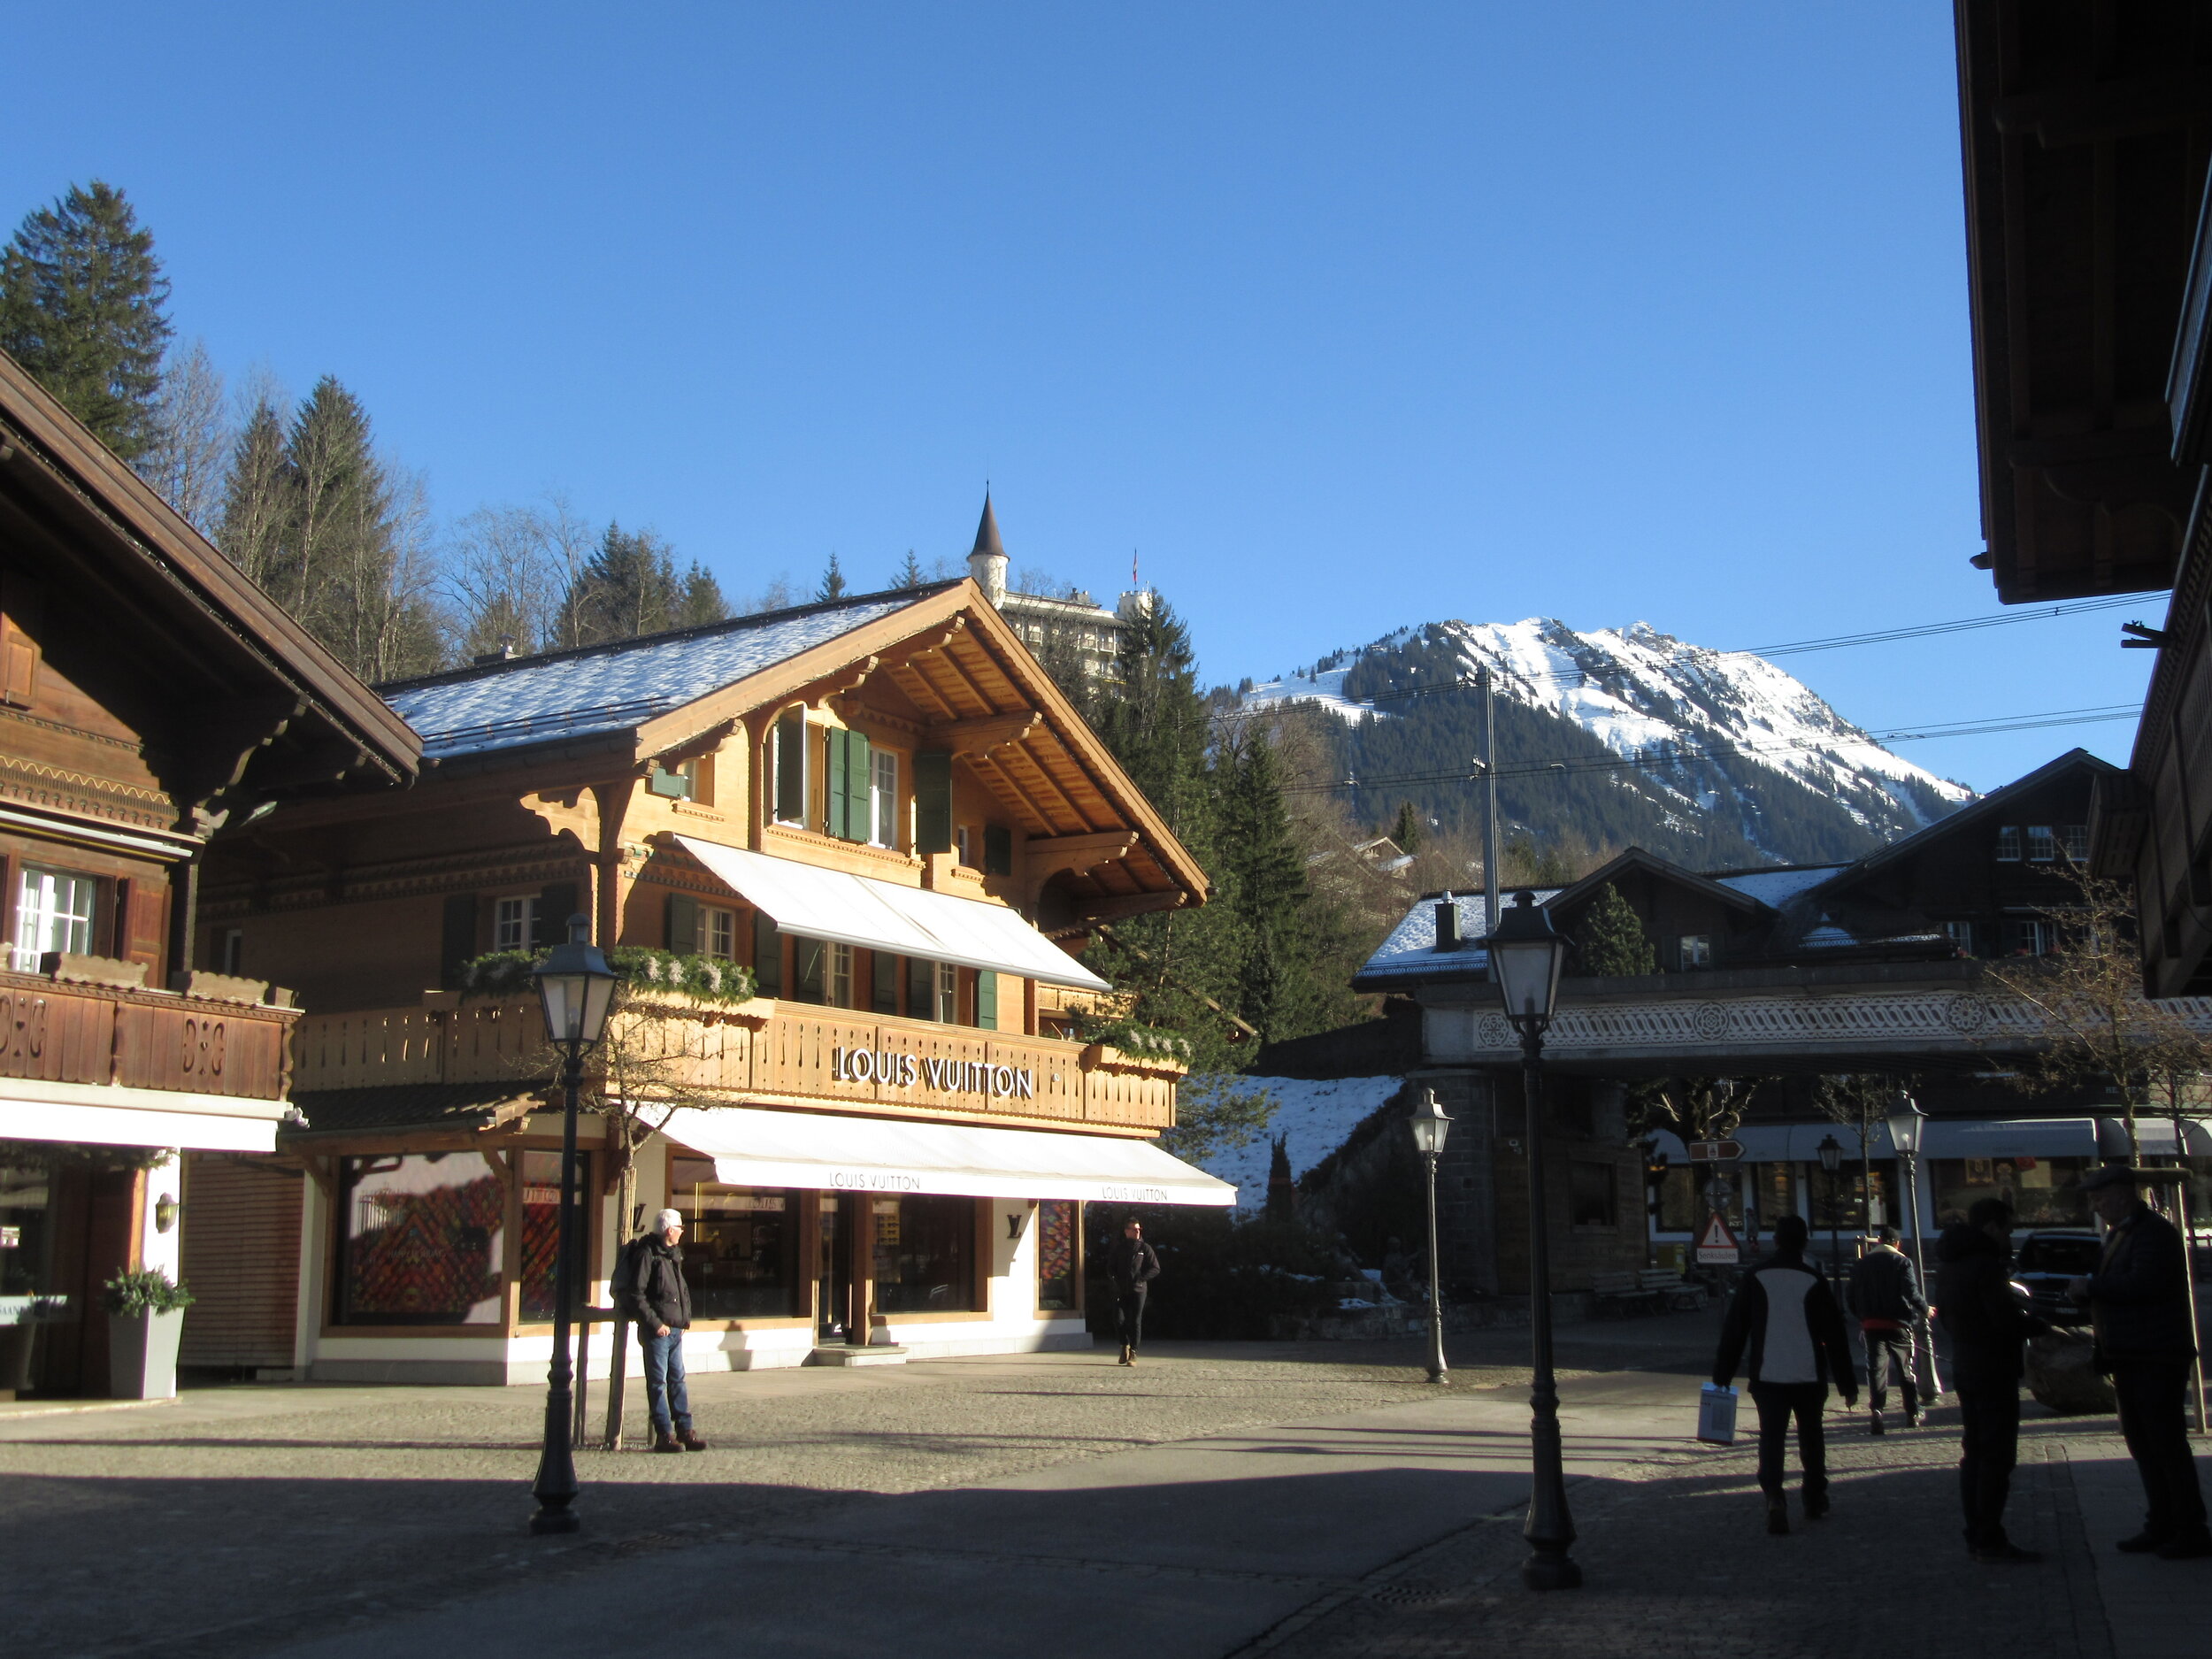 My brush with Nostalgia in Gstaad — www.